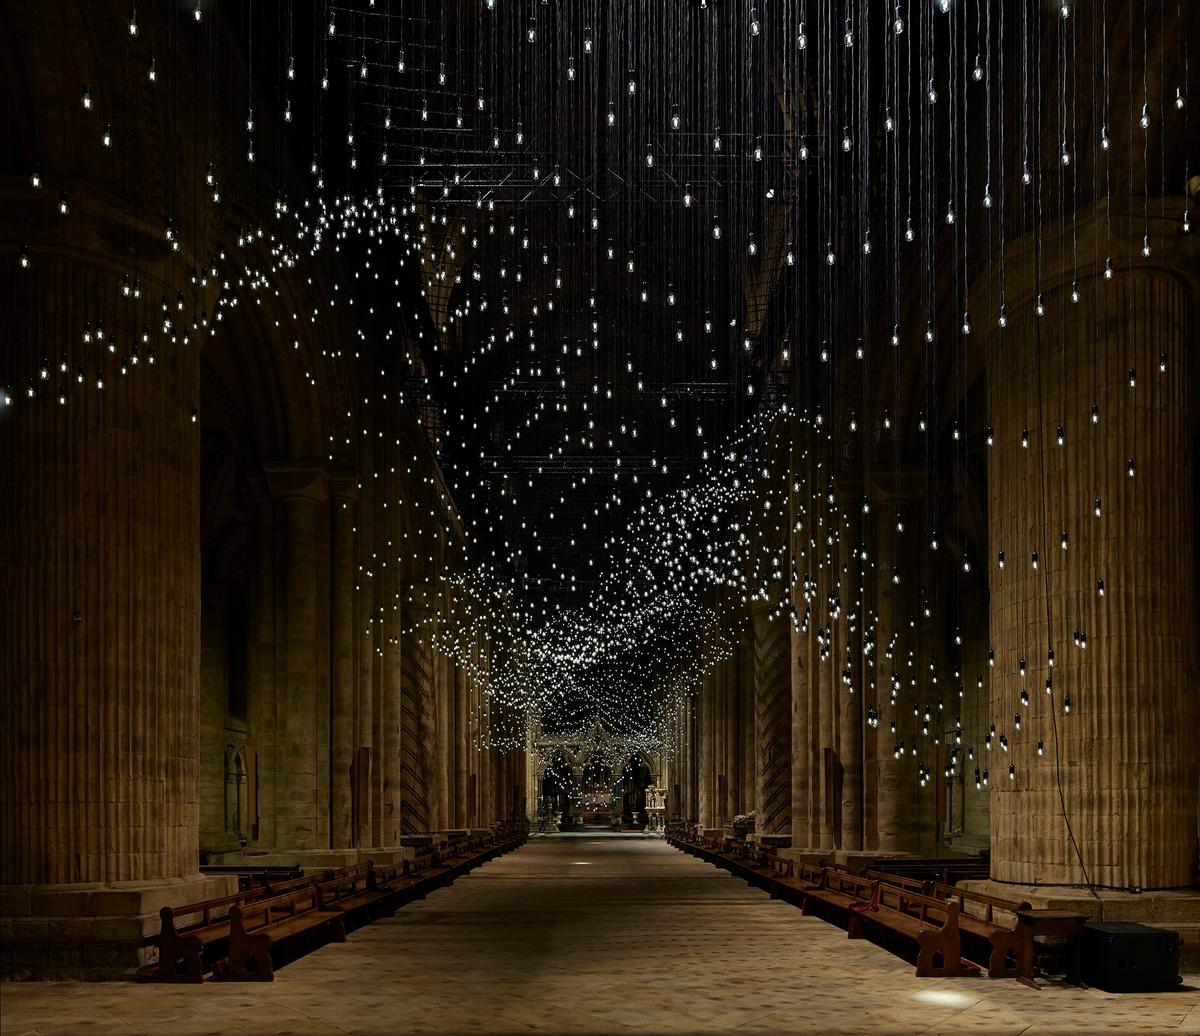 Rafael Lozano-Hemmer's Pulse Topology will involve thousands of pulsing light bulbs strung across the cathedral's nave

Lumiere 2023, produced by Artichoke